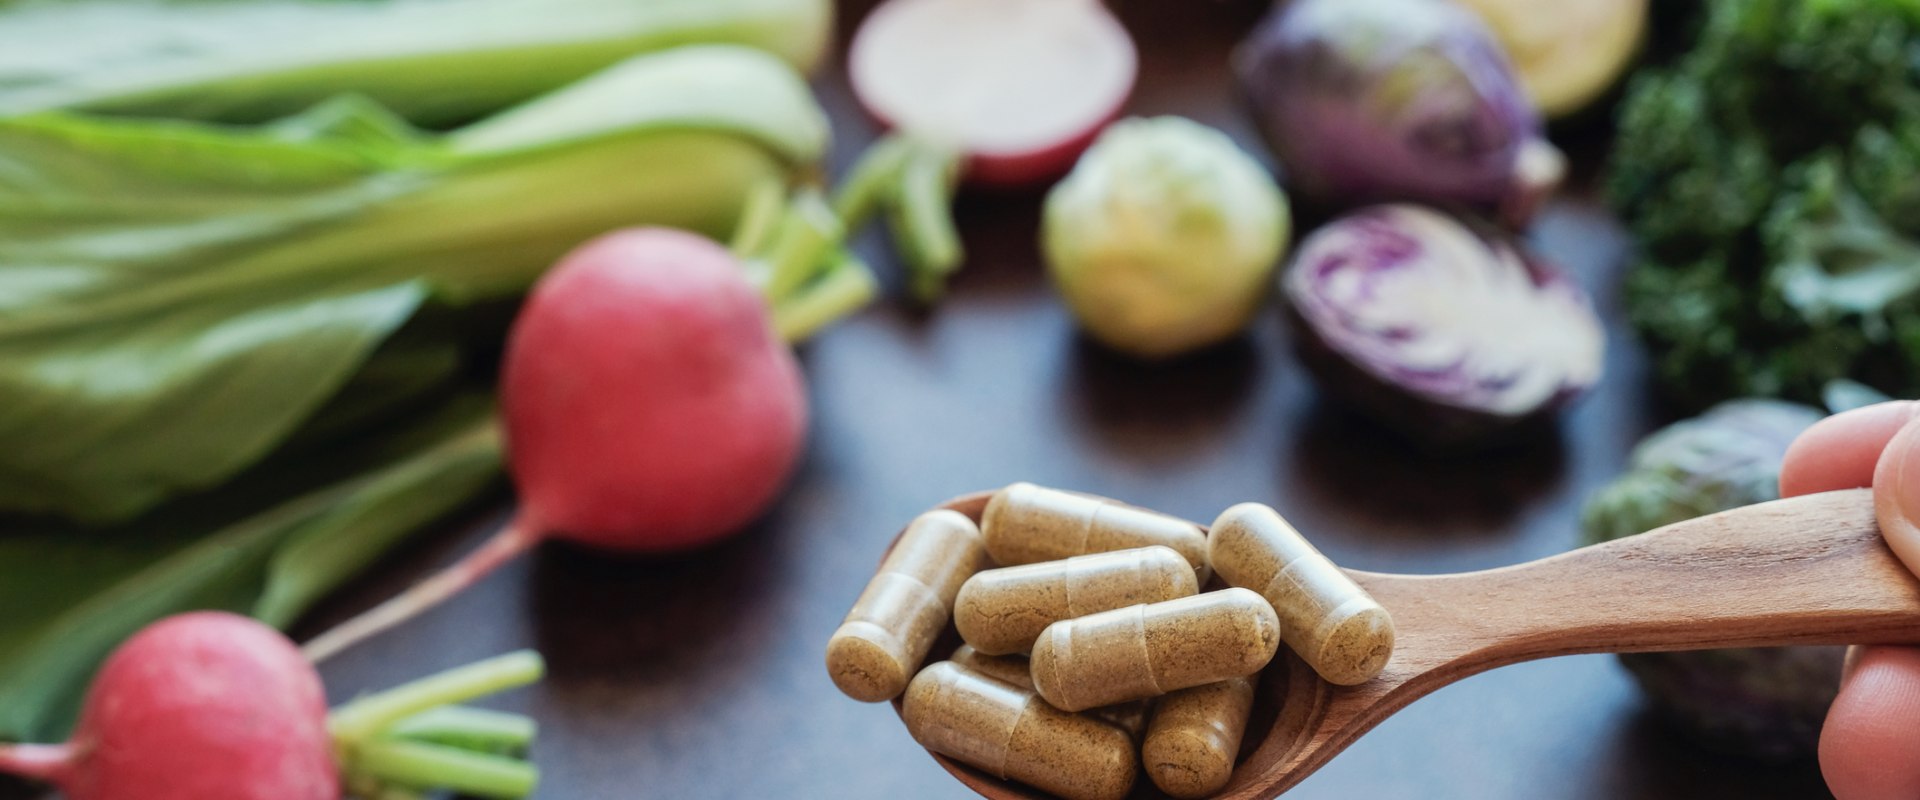 Are Dietary Supplements Safe? How to Make Sure You're Taking the Right Ones